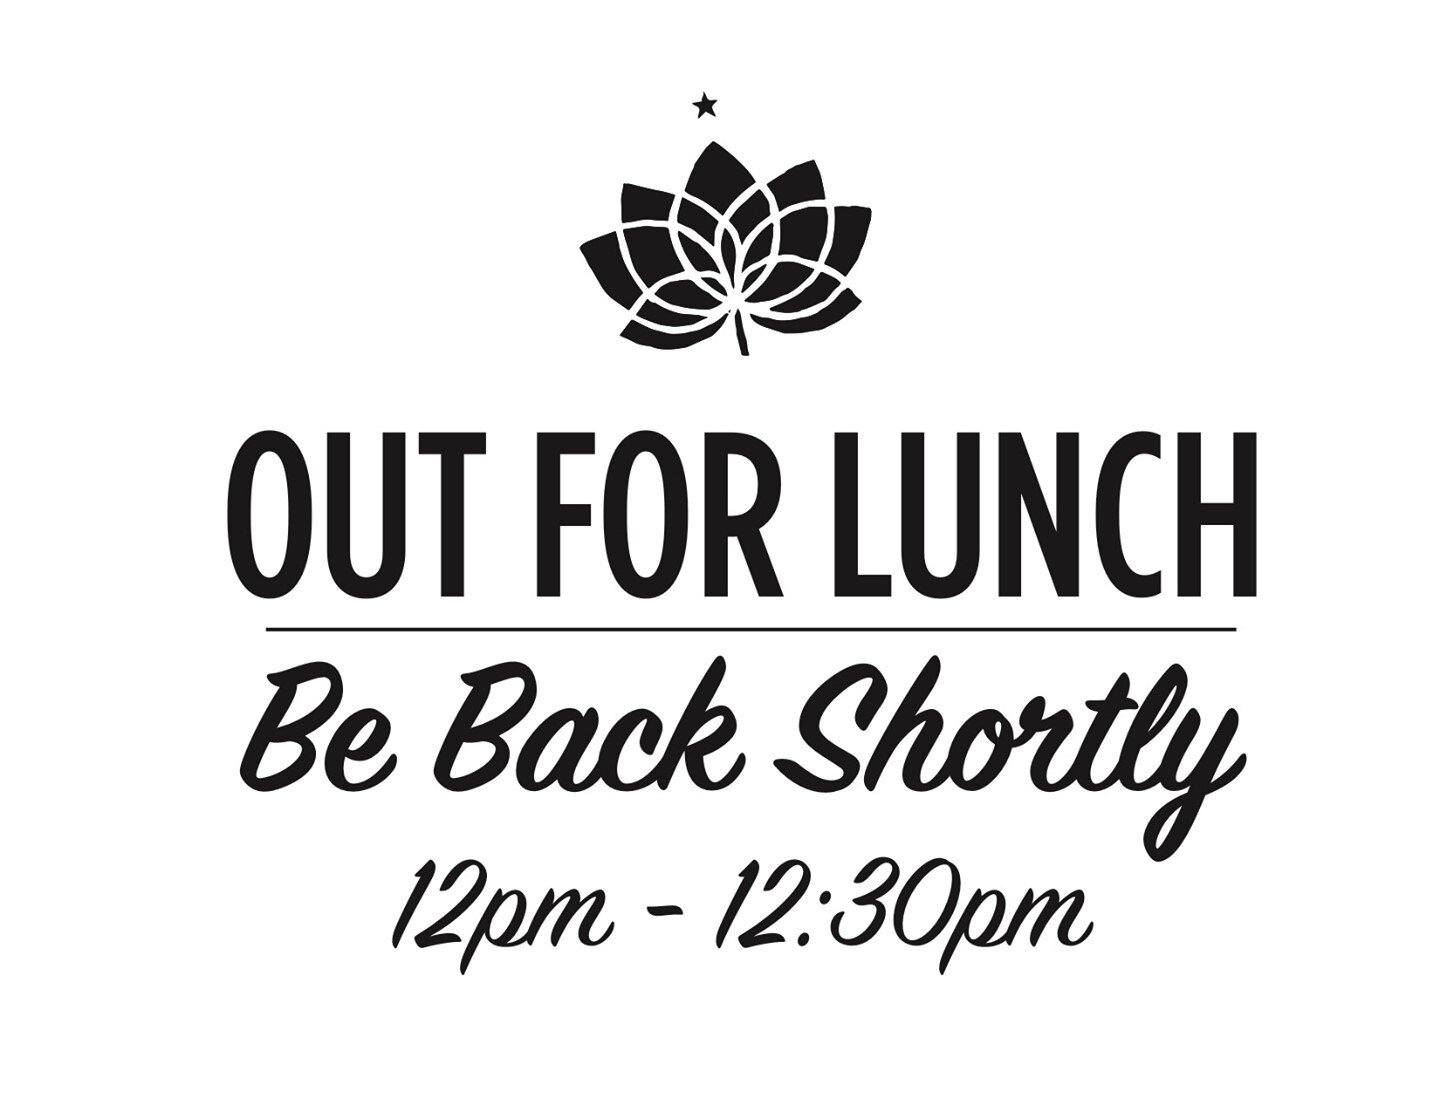 Starting Wednesday 7/7 we are implanting a 30 min lunch break for our staff! We will be closed 12-12:30pm Sunday - Friday! We will be open all day Saturday! Sorry for any inconvenience, we appreciate our customers and community and we are working dil